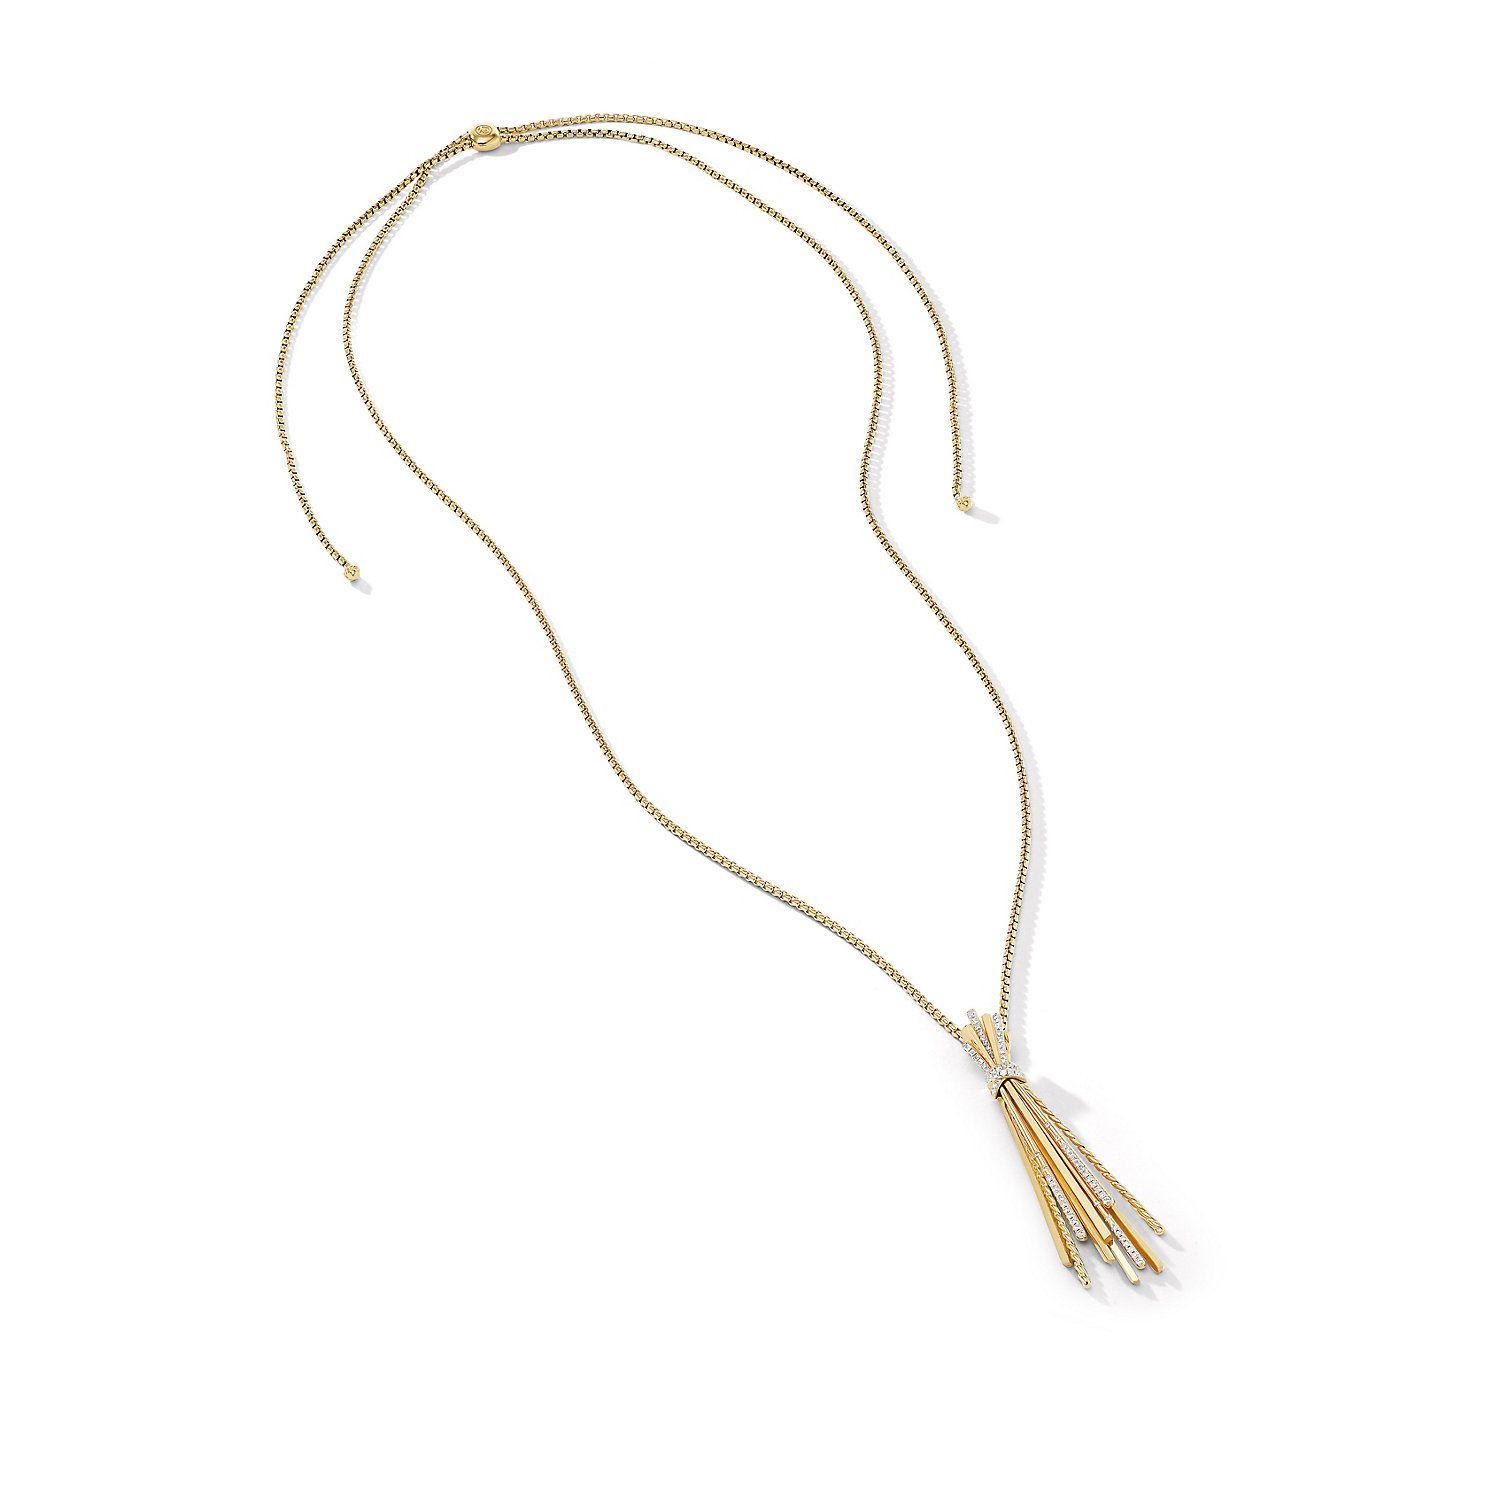 David Yurman Angelika Y Slider Necklace in 18K Yellow Gold with Pave Diamonds 1